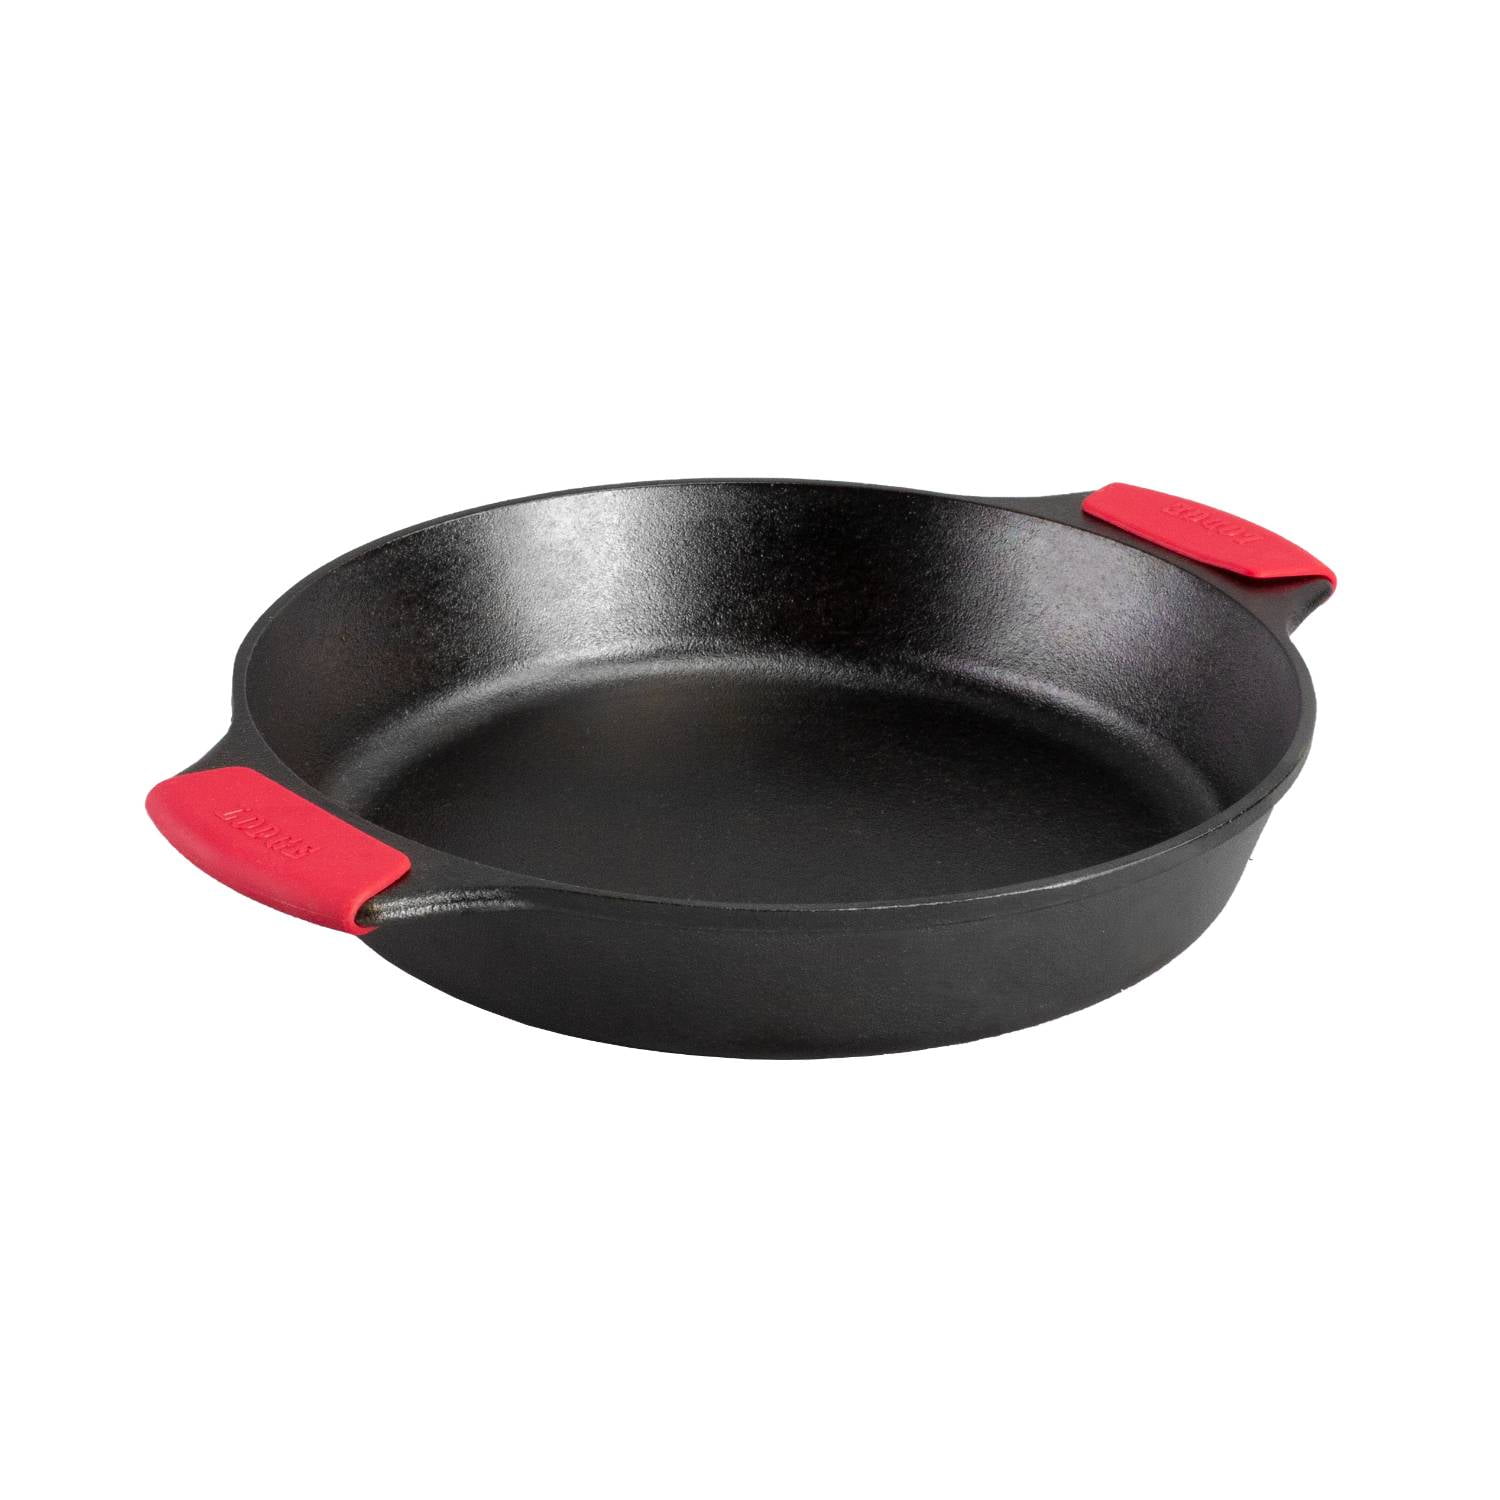 LODGE 10.25 INCH SEASONED CAST IRON GRILL PAN L8GPS (SILICONE HANDLE HOLDER  INCLUDED)